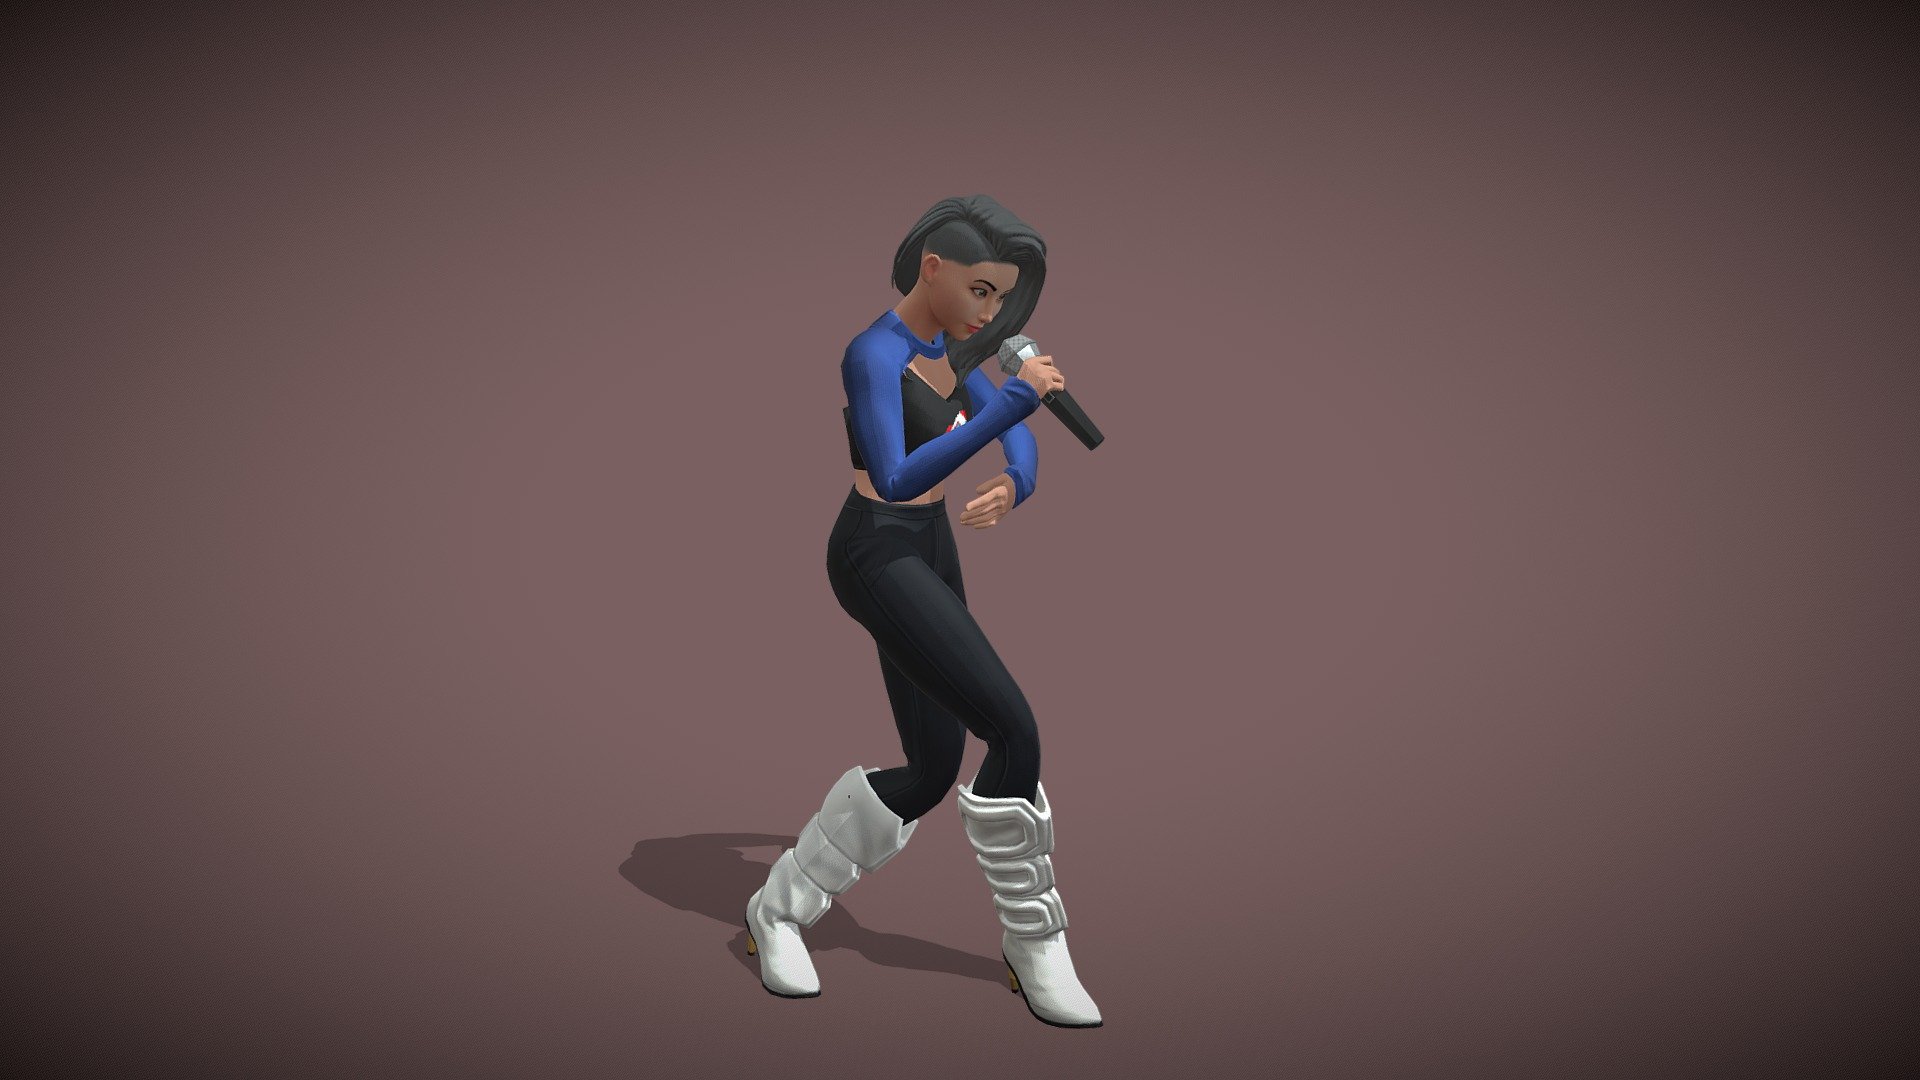 A female character sings with microphone in hand in this animated looping scene created in PixCap.

Here's a YouTube video created using this model: I Kissed a Girl - Official Music Video

https://youtu.be/-HUb5hNByb8 - Animated Model Singing with Microphone in Hand - Download Free 3D model by LasquetiSpice 3d model